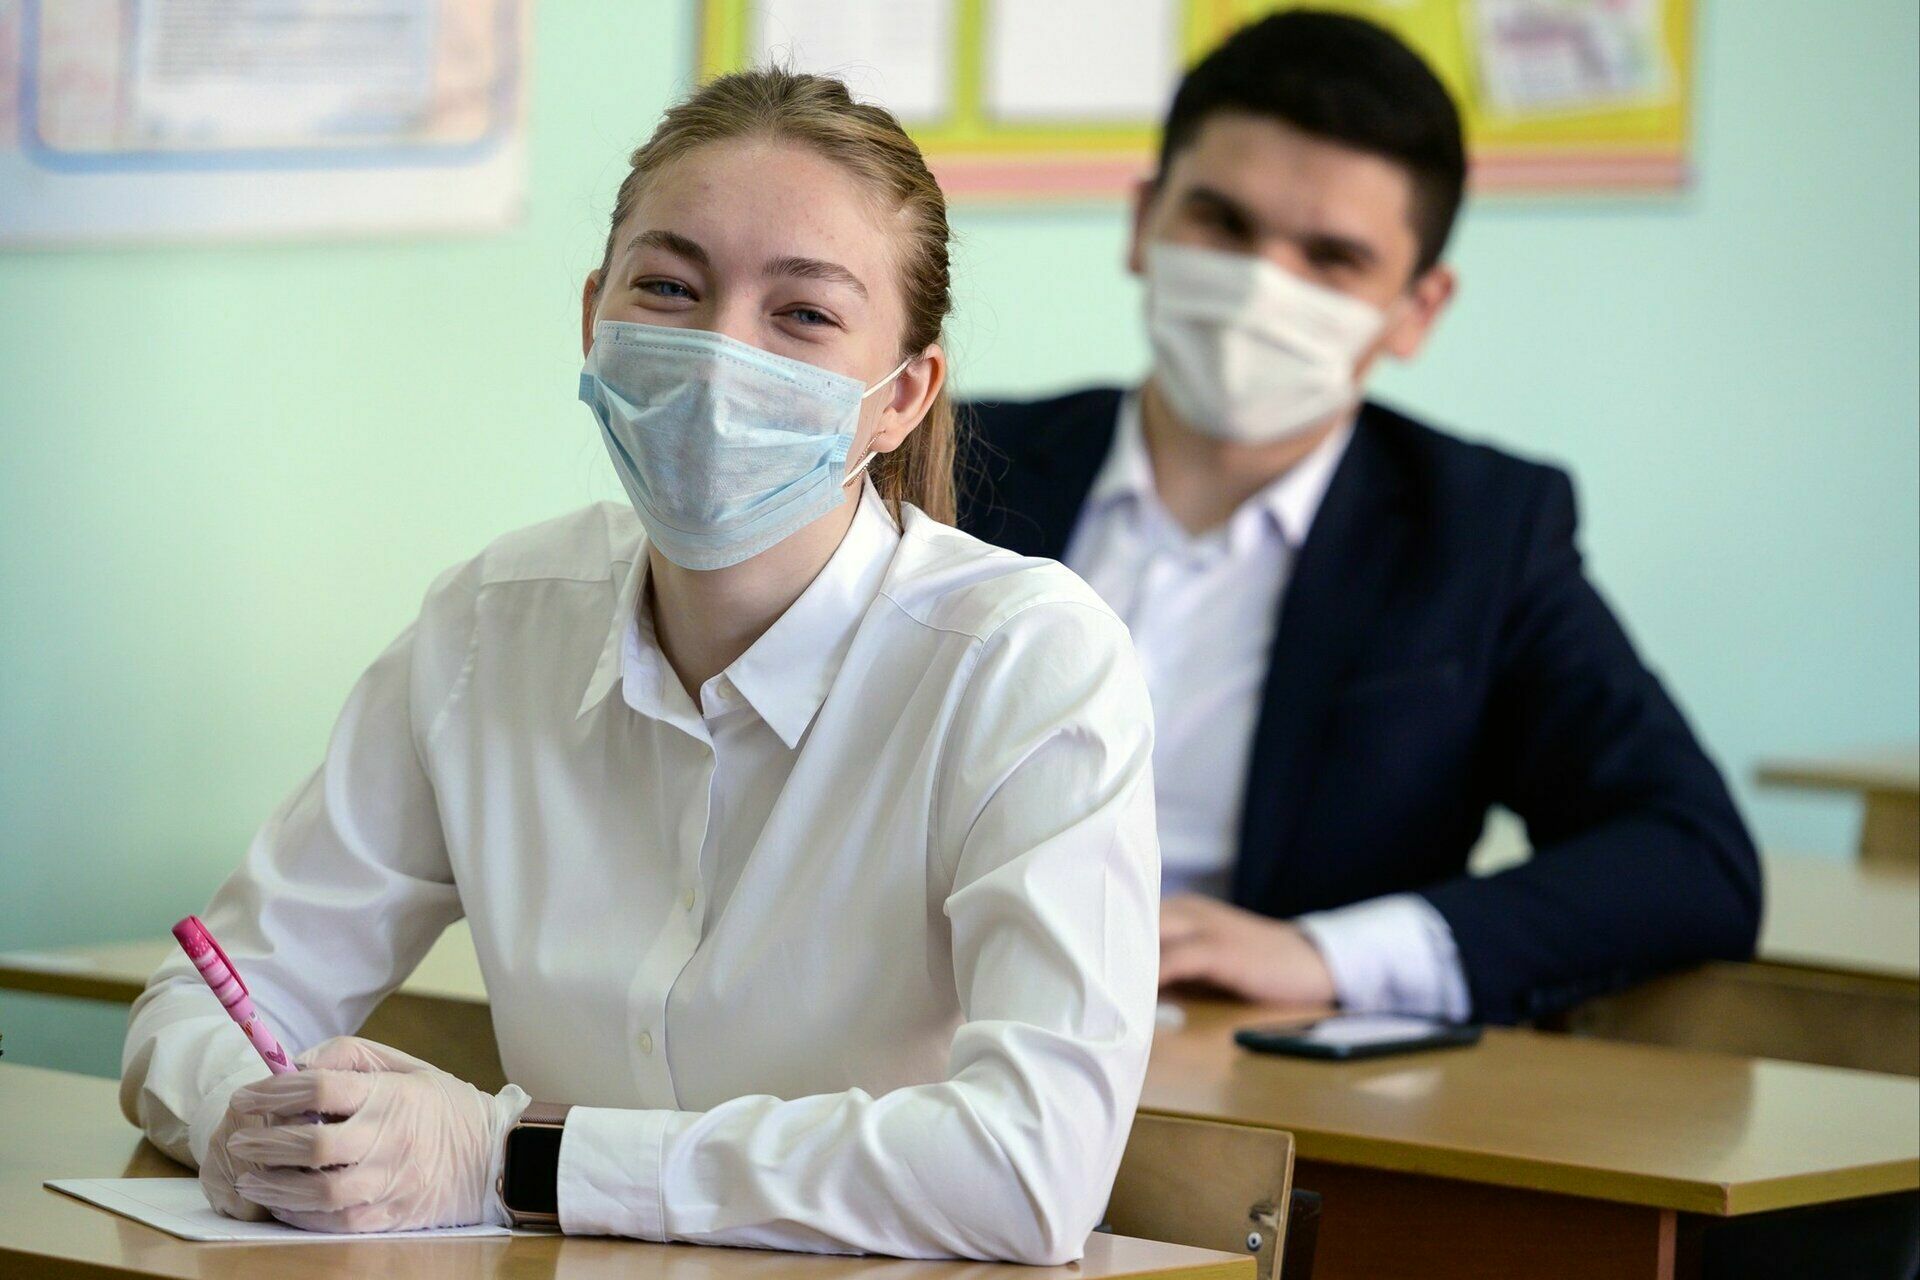 Moscow high school students were transferred to distance learning